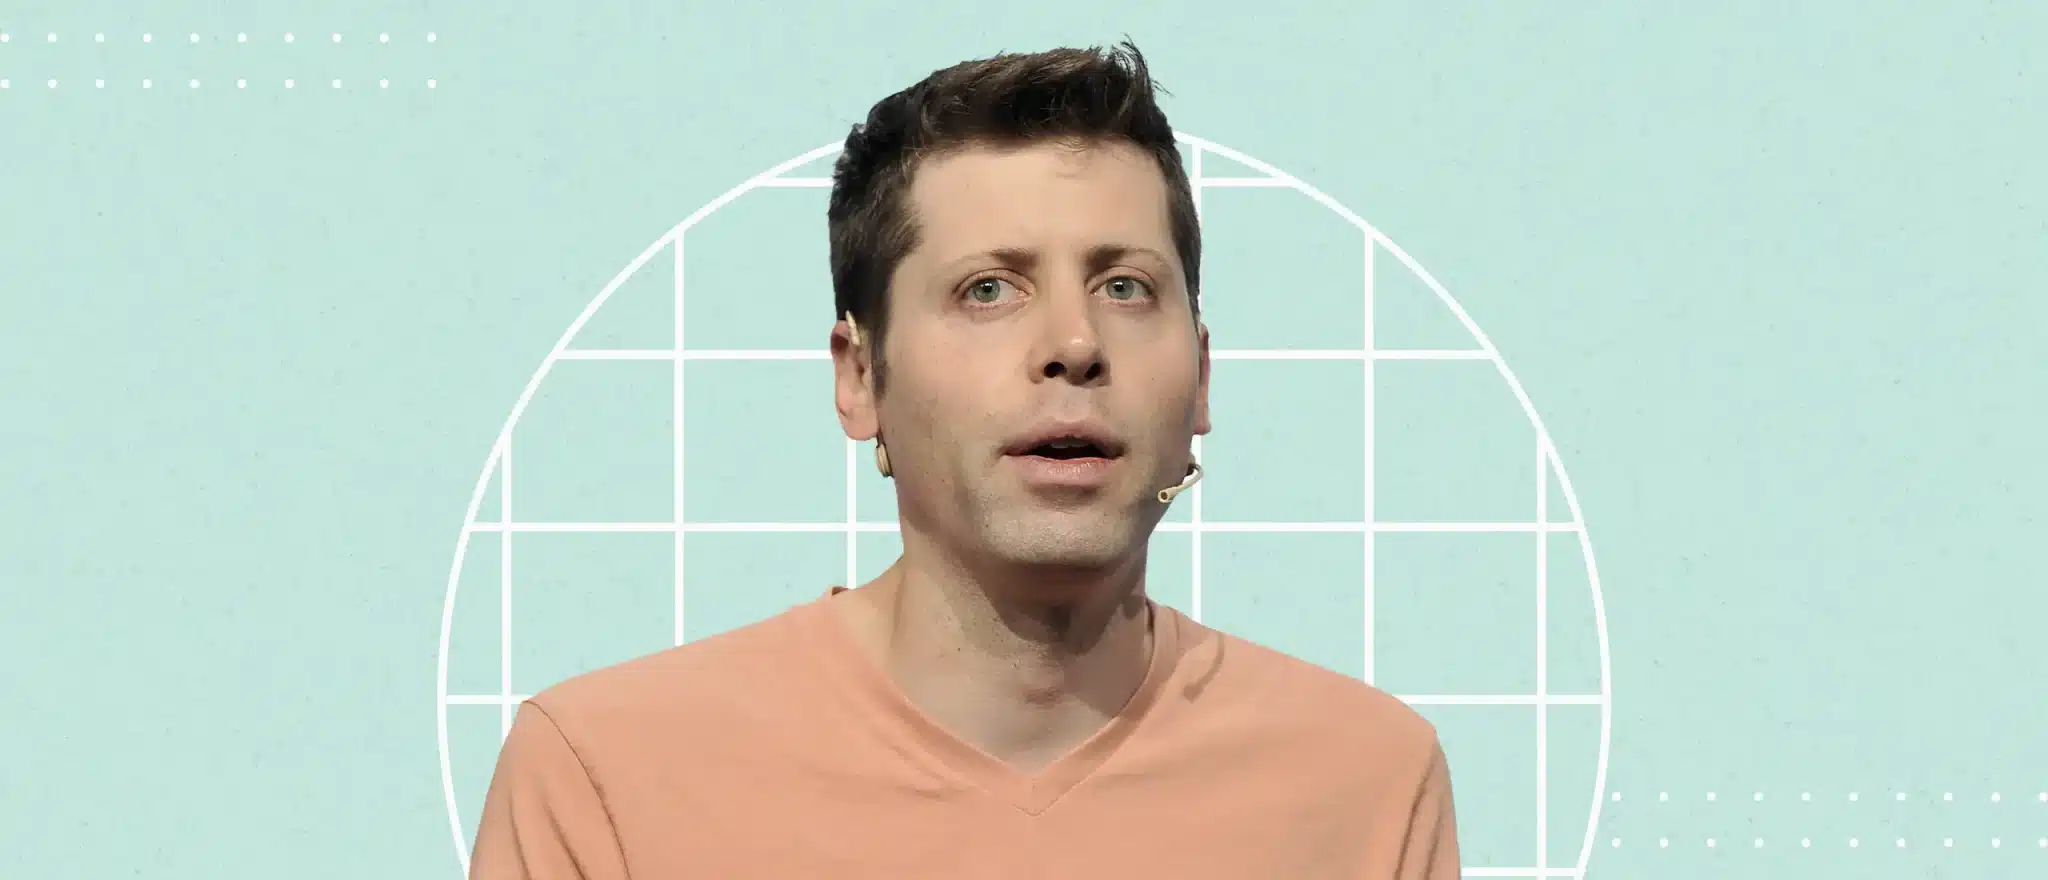 ChatGPT CEO Sam Altman’s Anti-Aging Routine Is Worth Copying